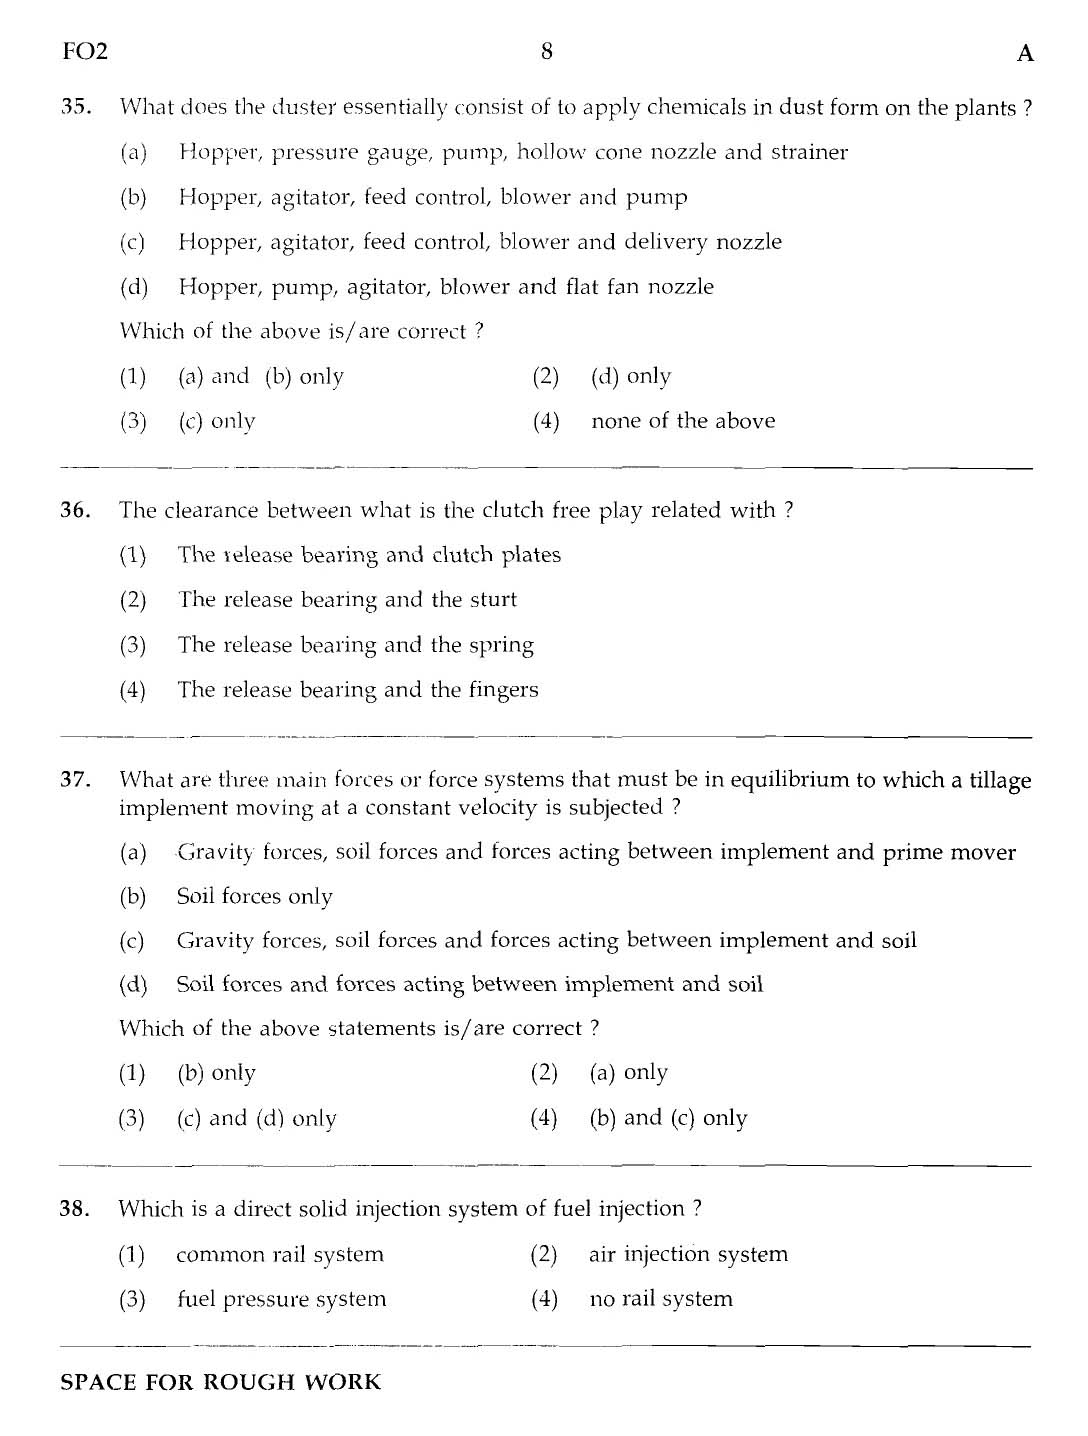 MPSC Agricultural Services Main Exam 2012 Question Paper Agricultural Engineering 7